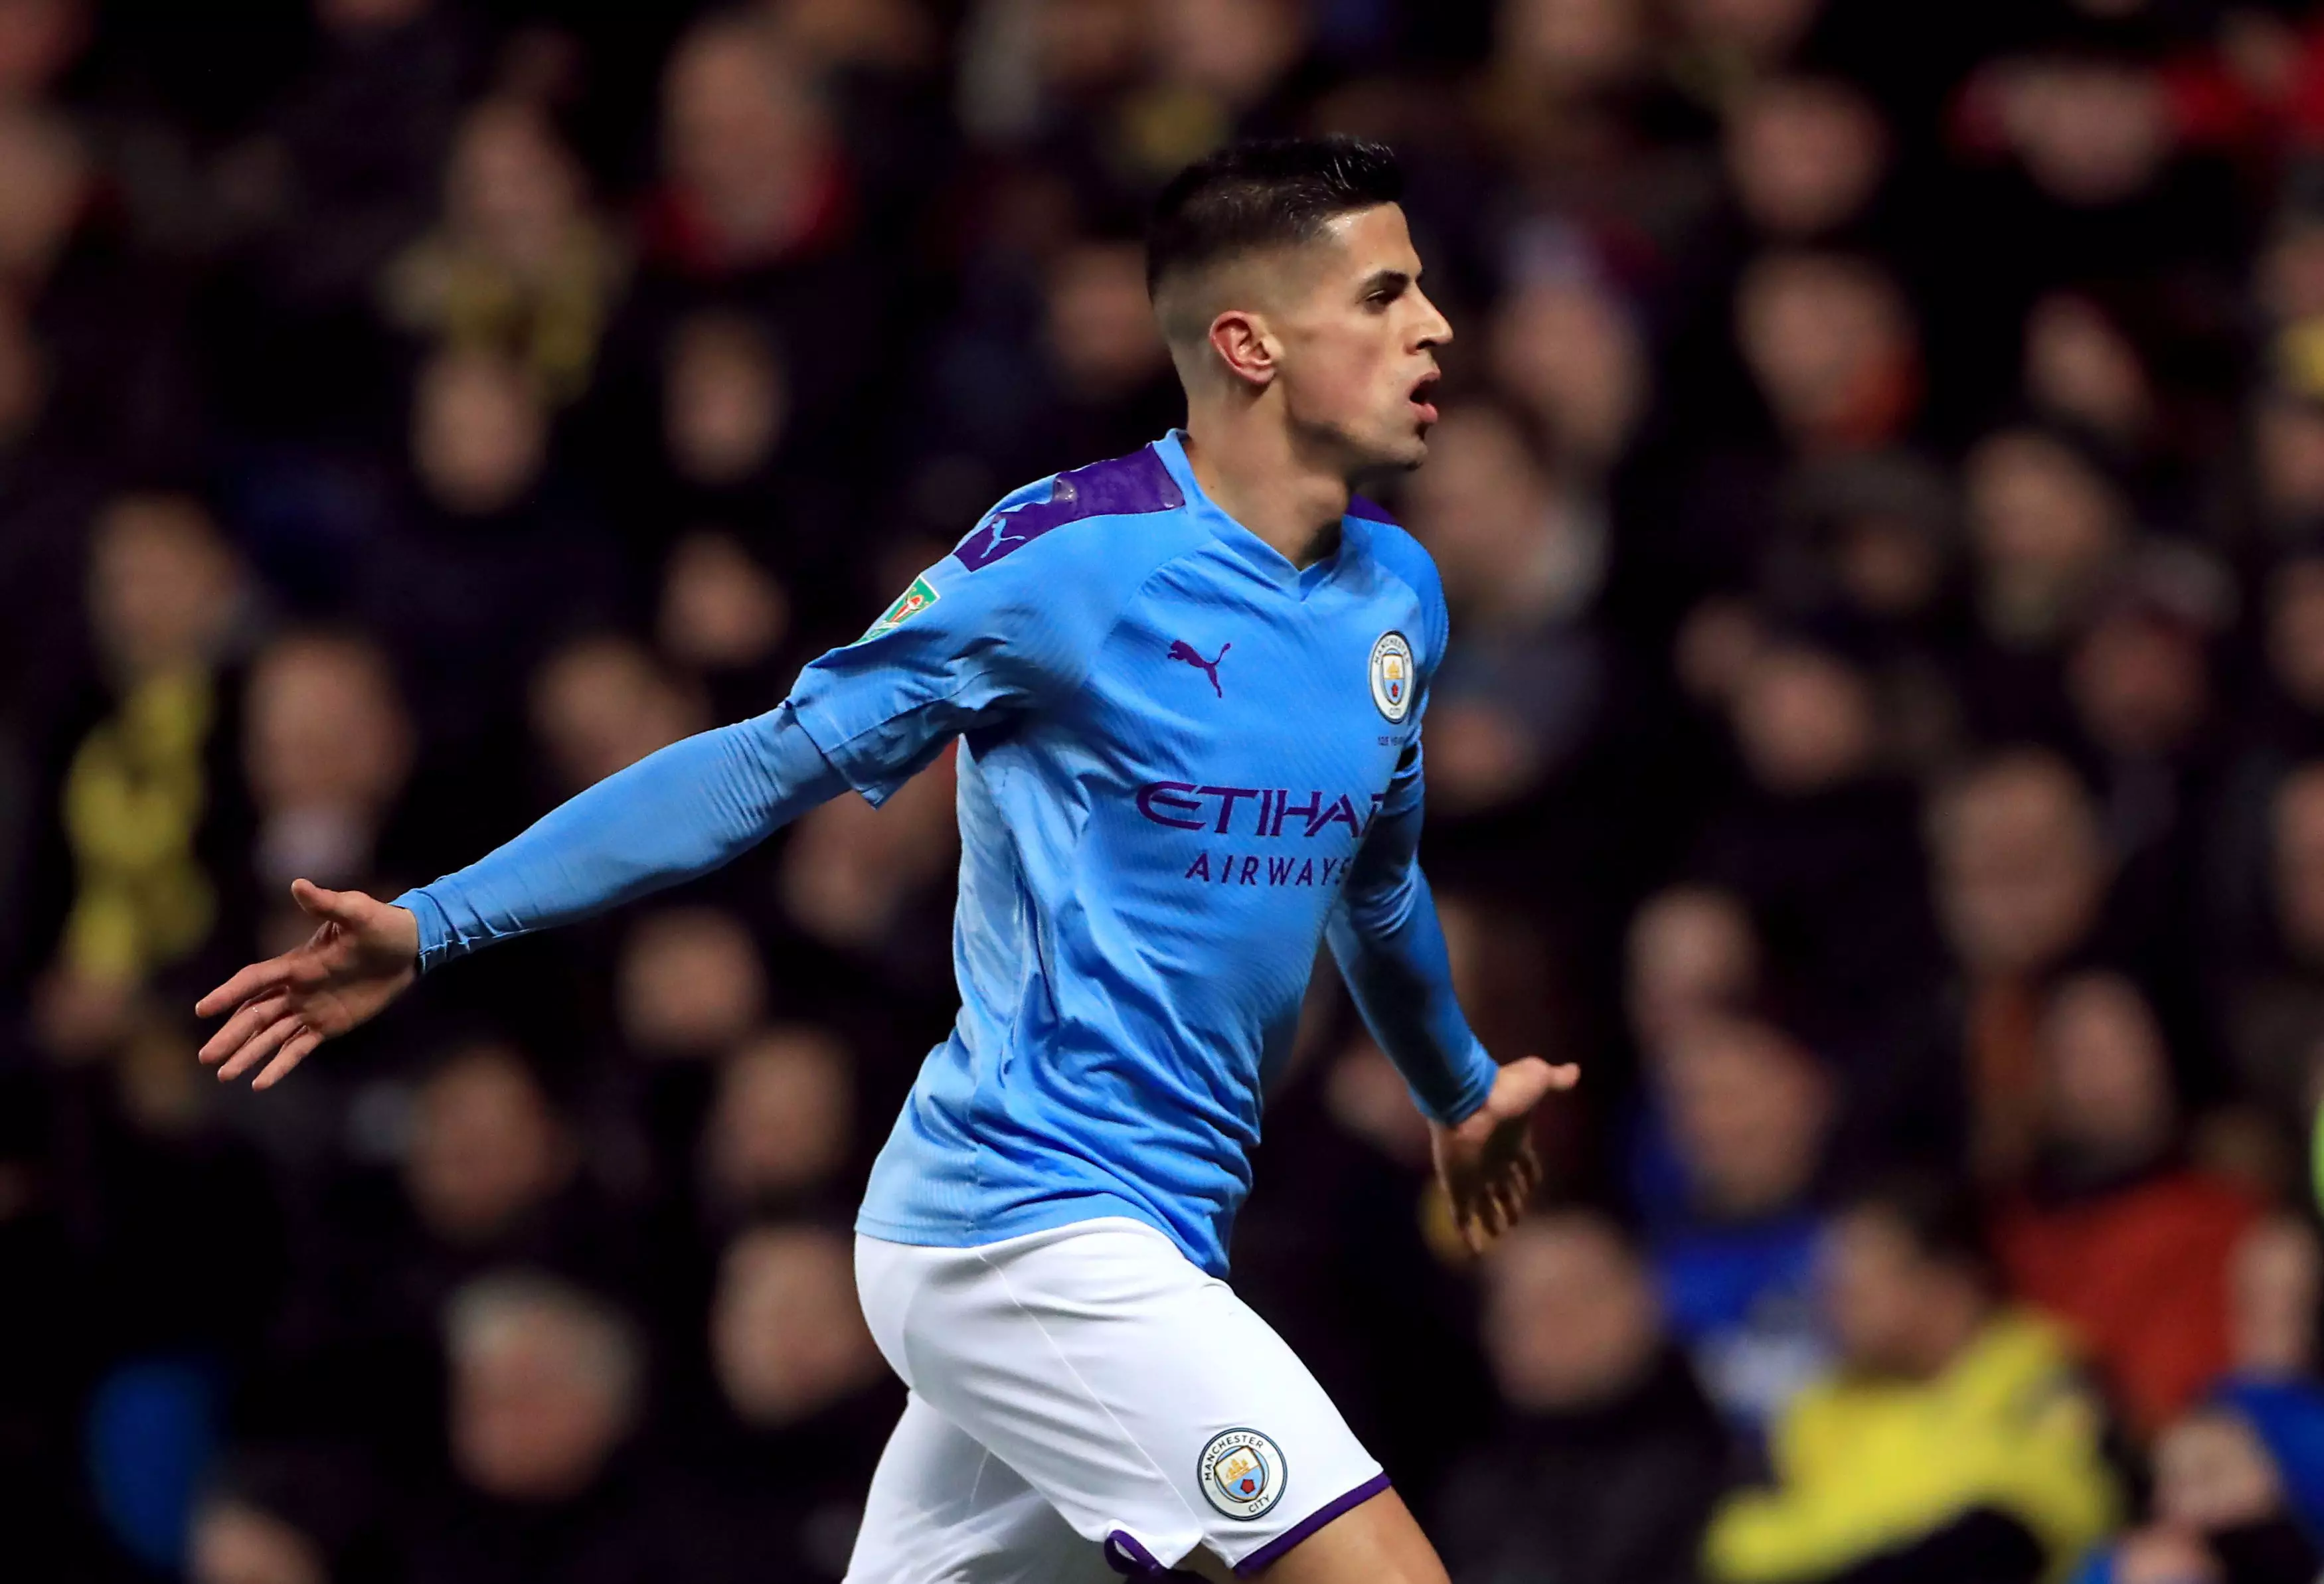 Joao Cancelo should feature in Pep Guardiola's star-studded starting line-up